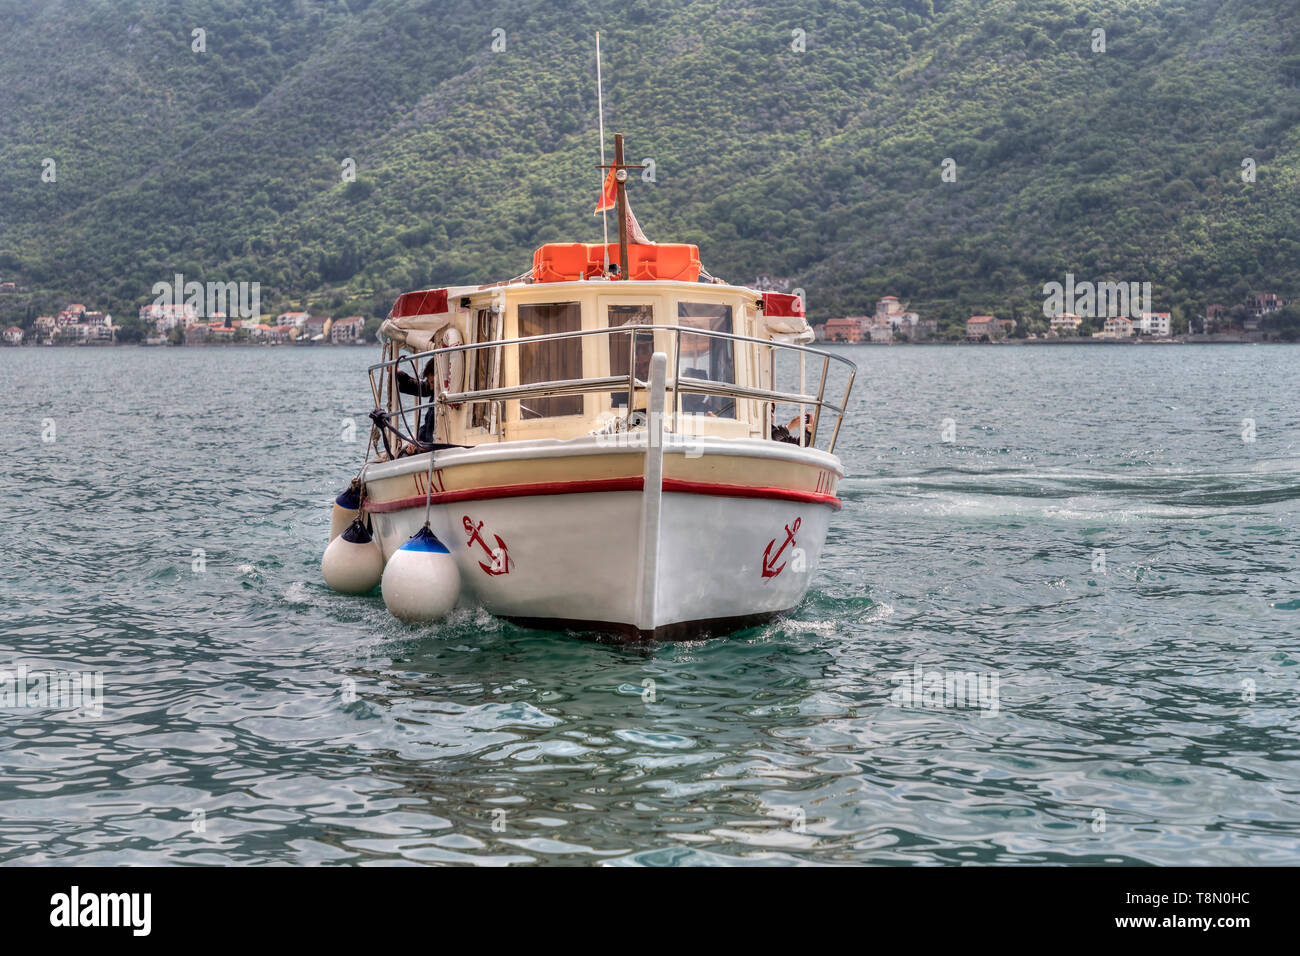 Kotor Bay, Montenegro, May 3rd 2019: A boat with group of tourists approaching the pier in the ancient town of Perast Stock Photo